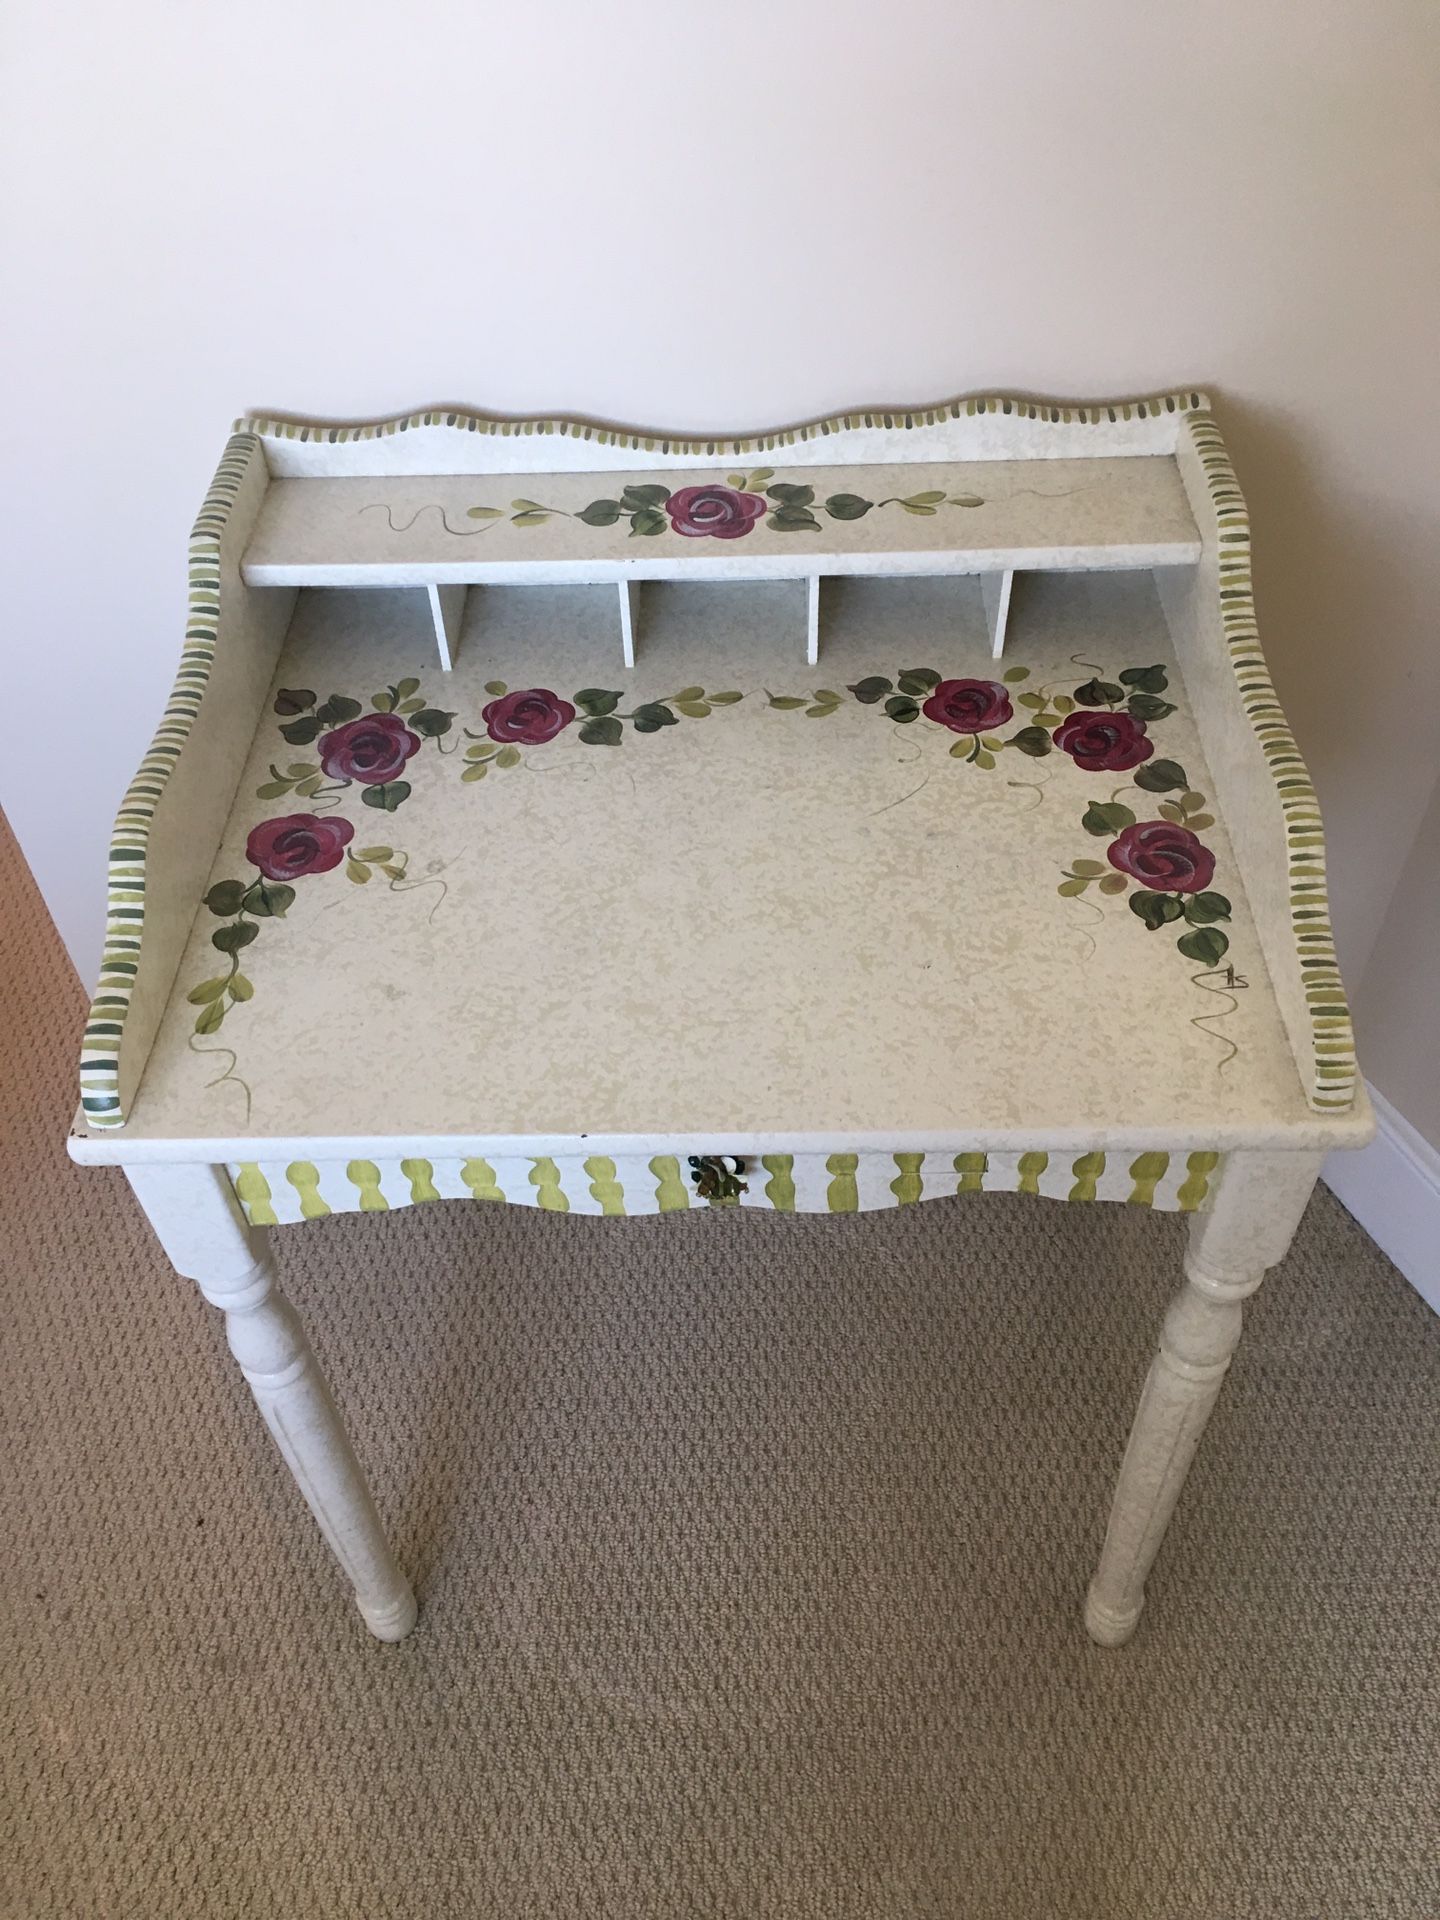 Rose painted table